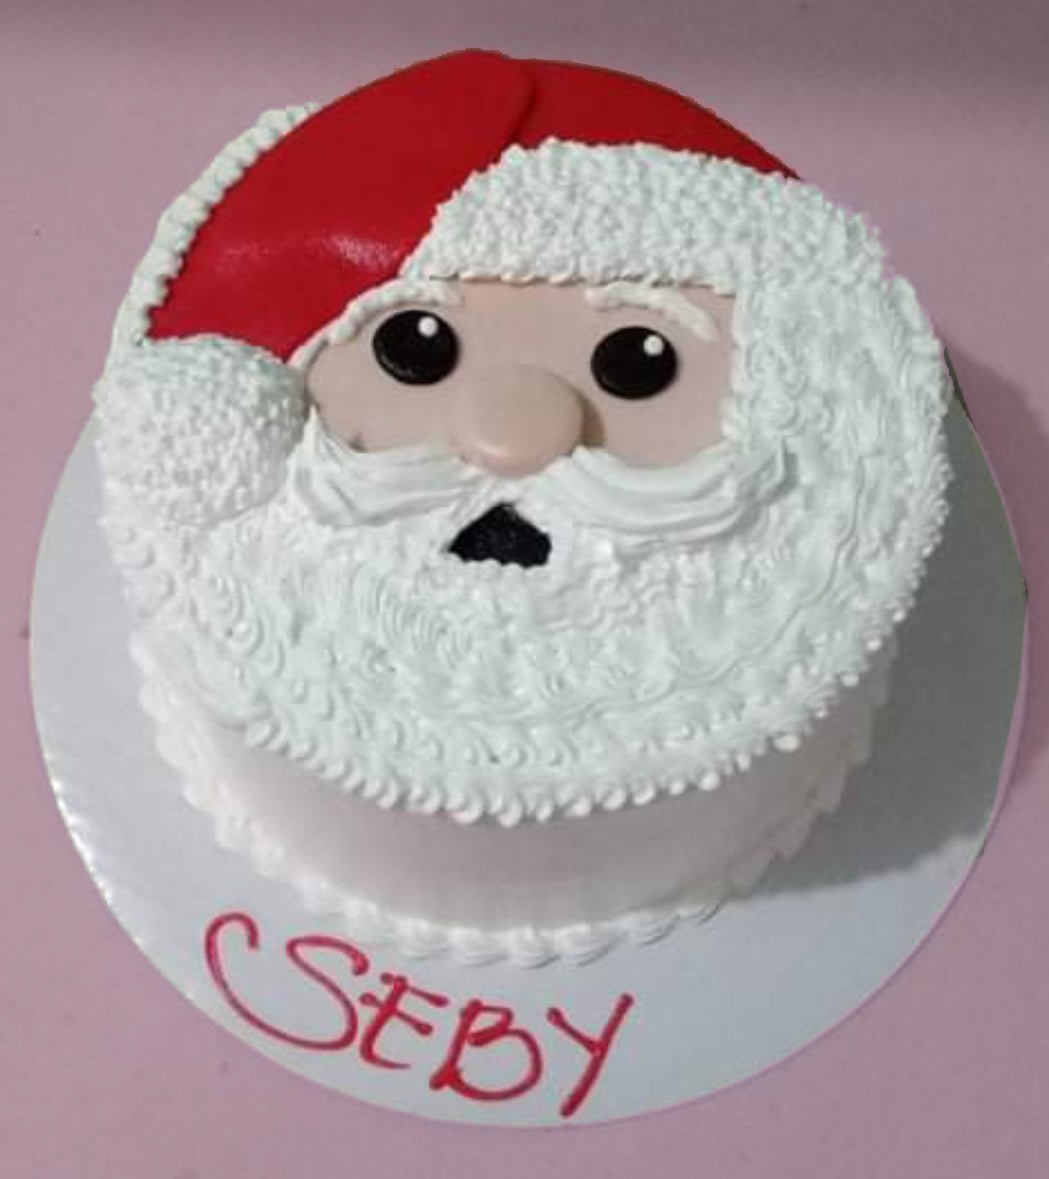 Order your Christmas cake online